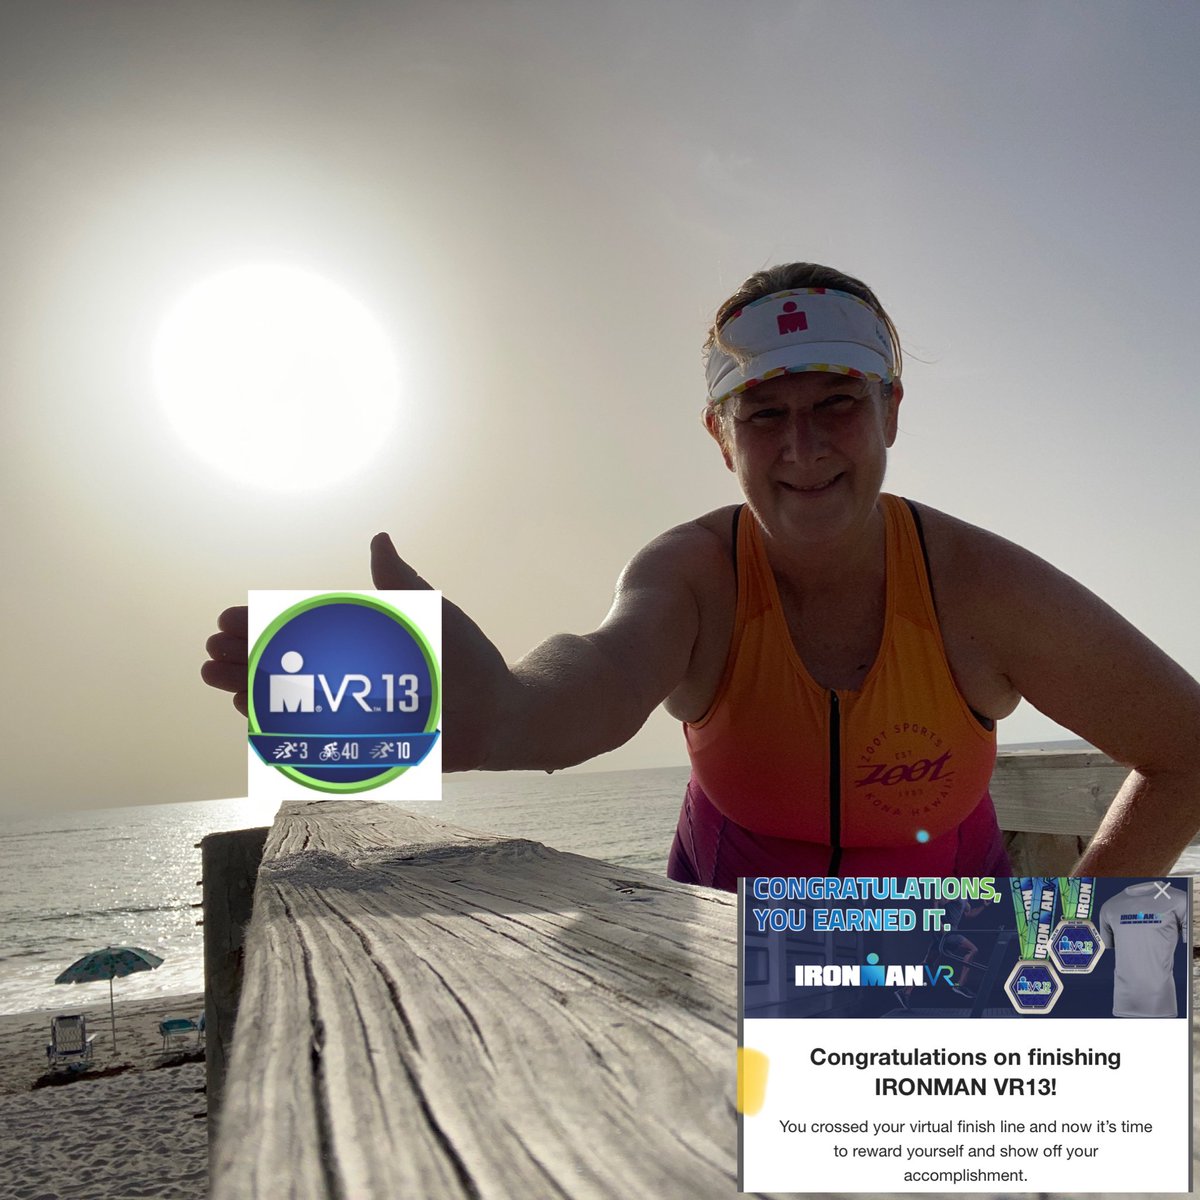 That’s a wrap on IronmanVR13!
#IronmanVR13
#IronmanVirtualClub #AnywhereIsPossible #IRaceLikeAGirl #DontMessWithMamaBear